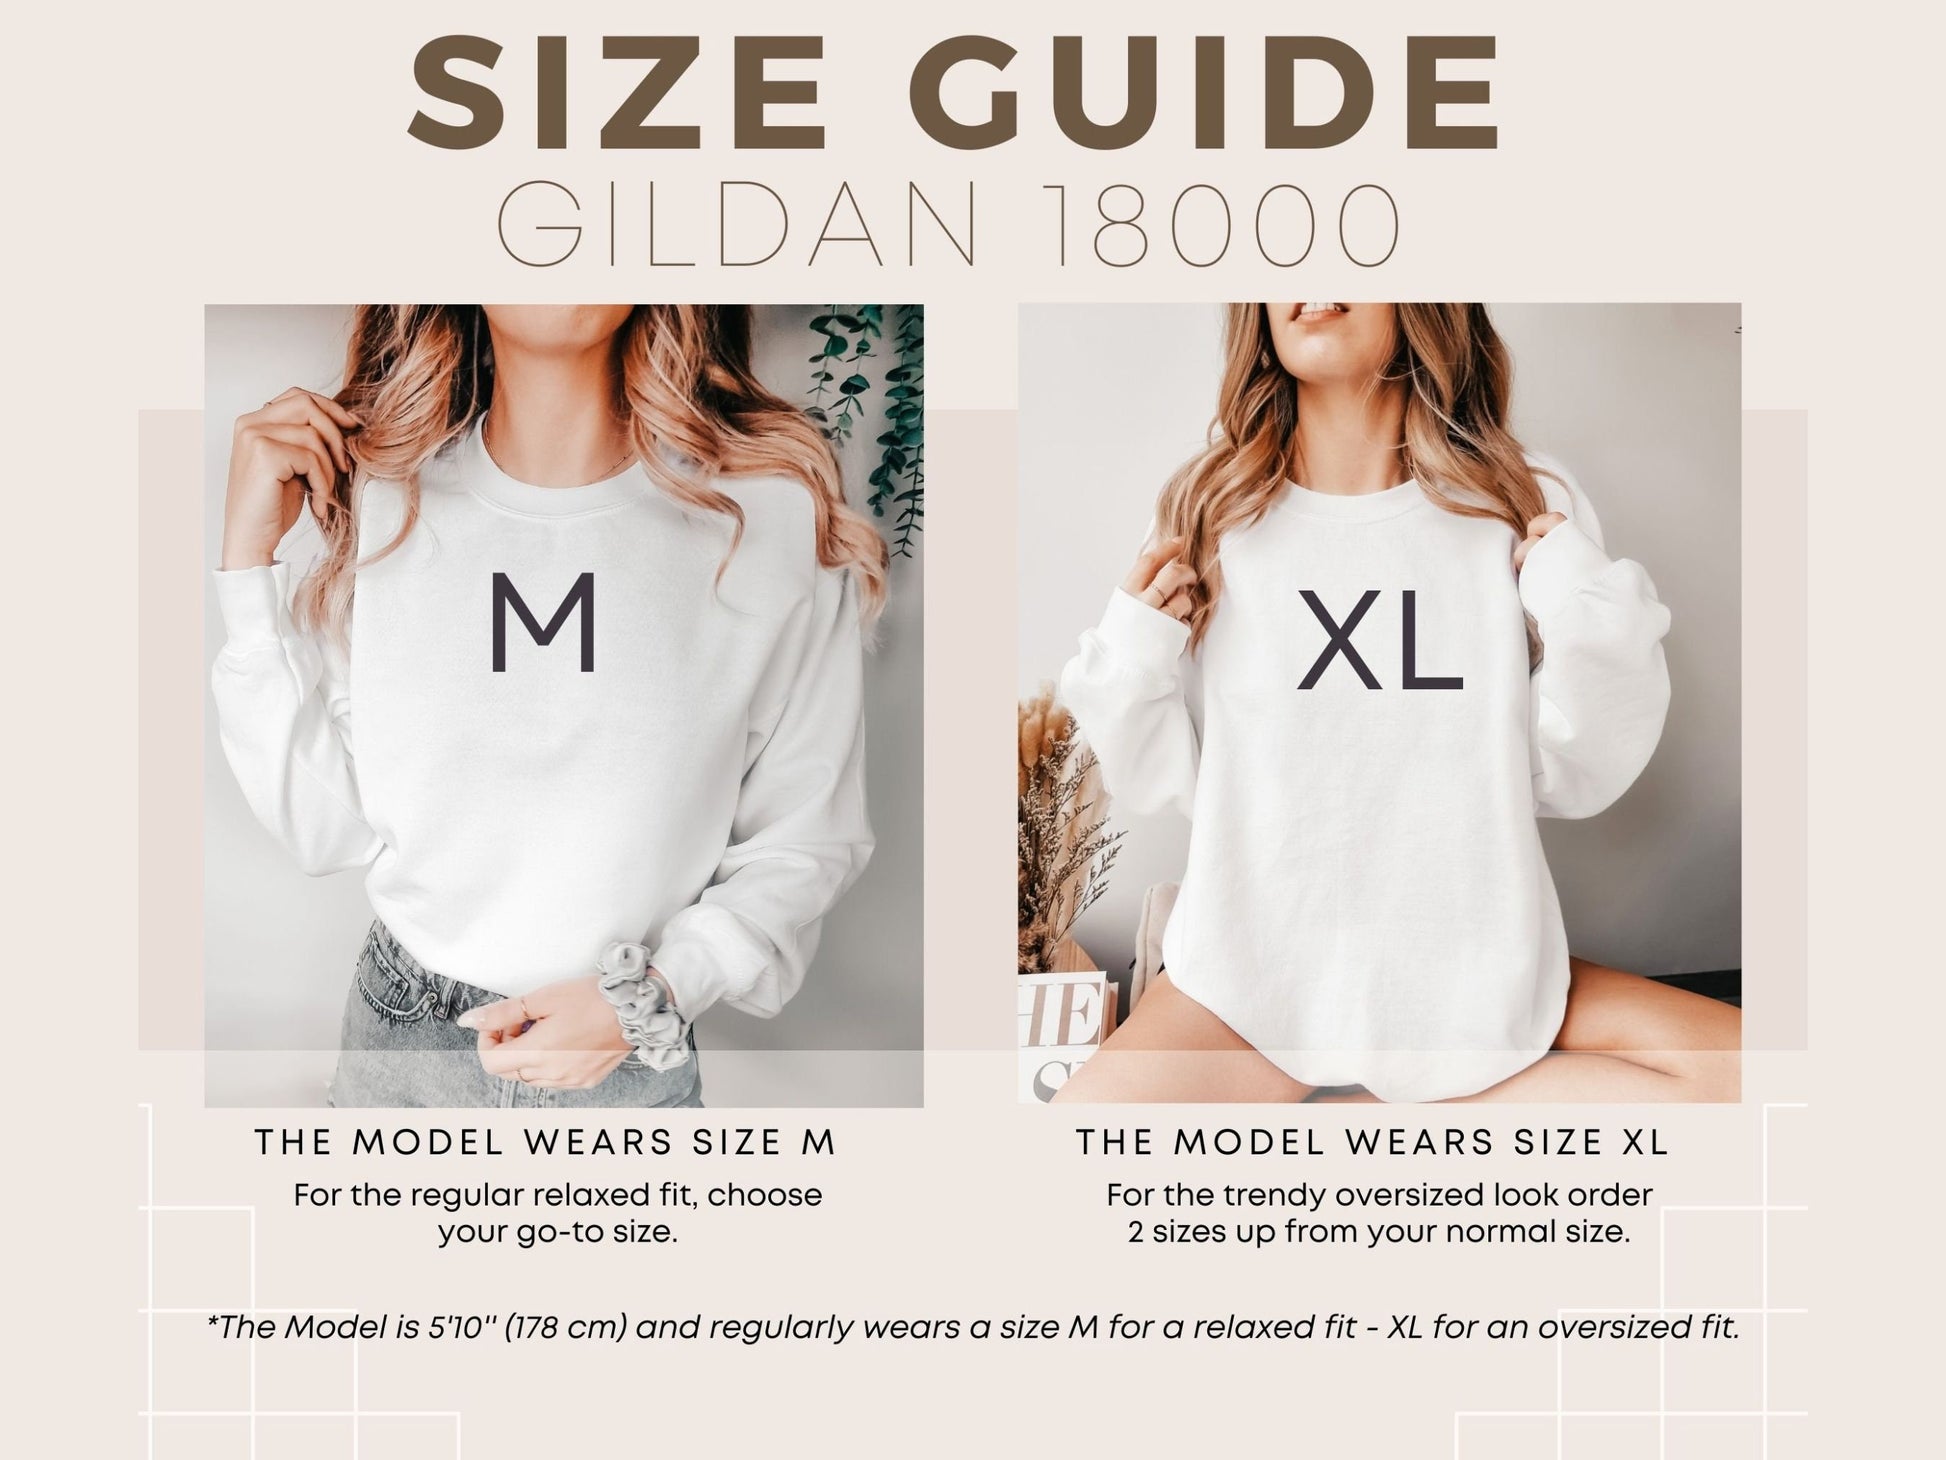 A size guide for comfort colors showing a model wearing different sizes of shirts for consumer reference. The model is 5&#39;6&quot; and regularly wears a size medium for a relaxed fit.